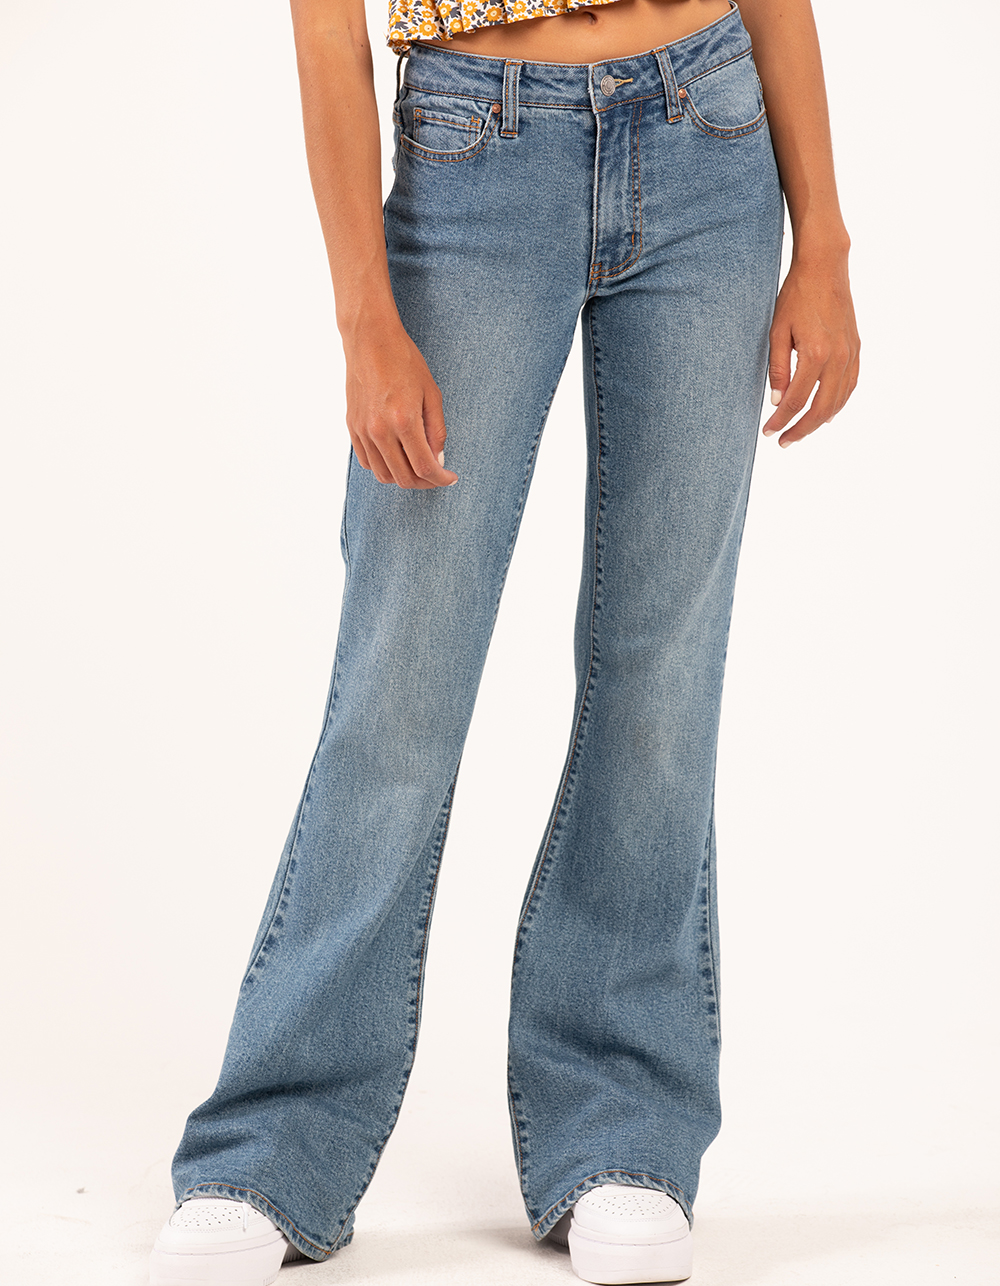 RSQ Womens Low Rise Flare Jeans - MEDIUM WASH